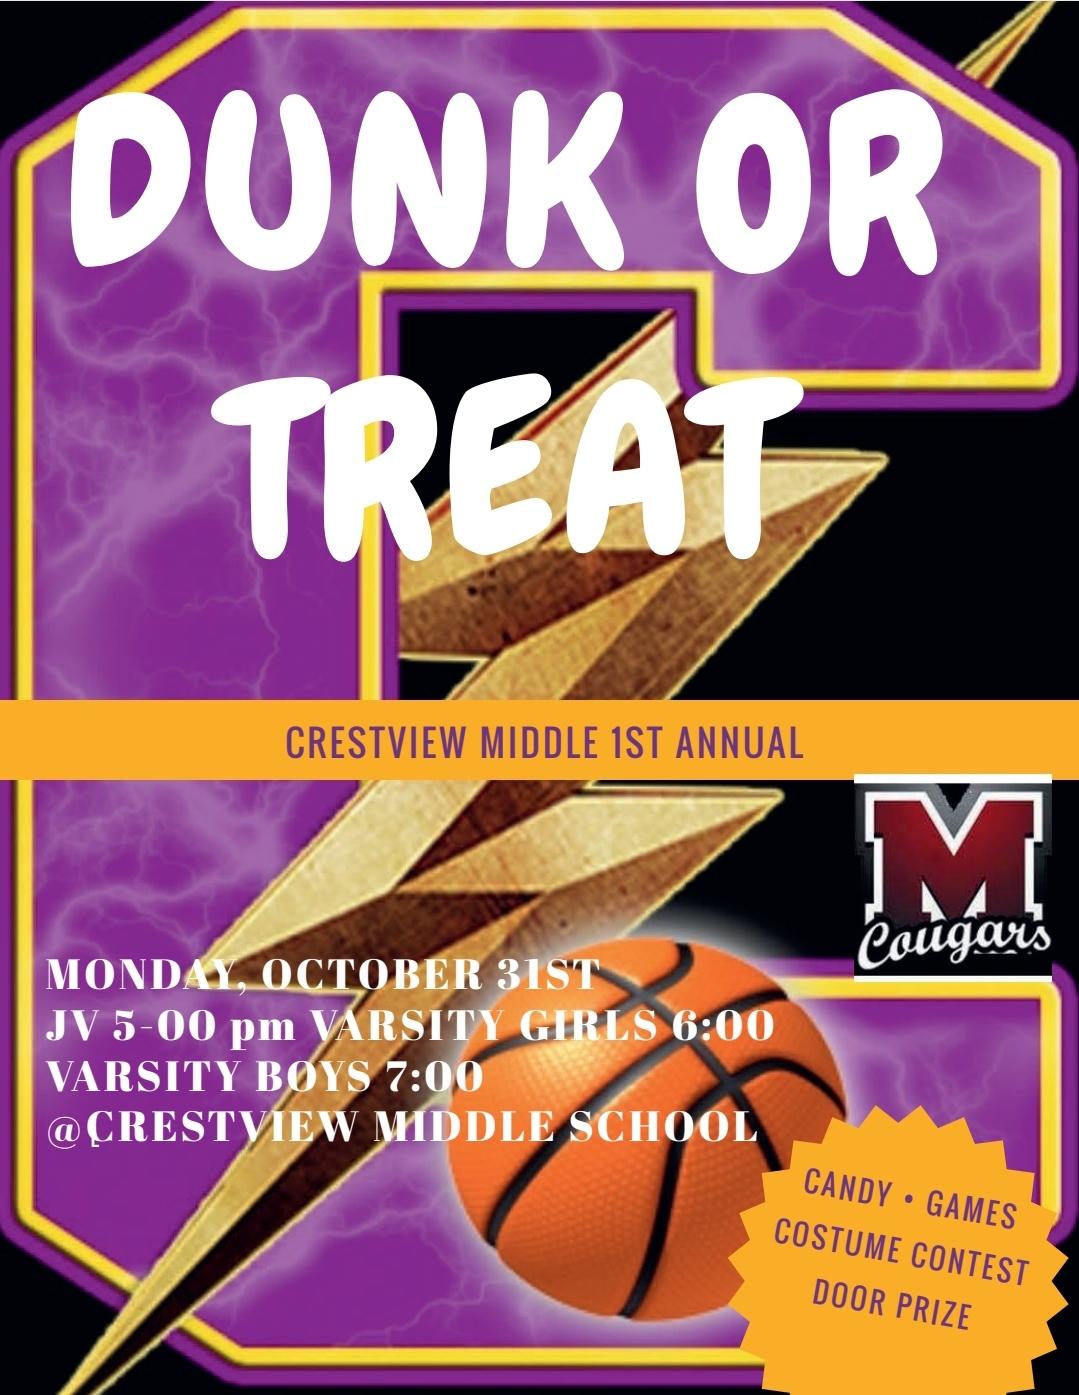 Dunk or Treat at Crestview Middle October 31st